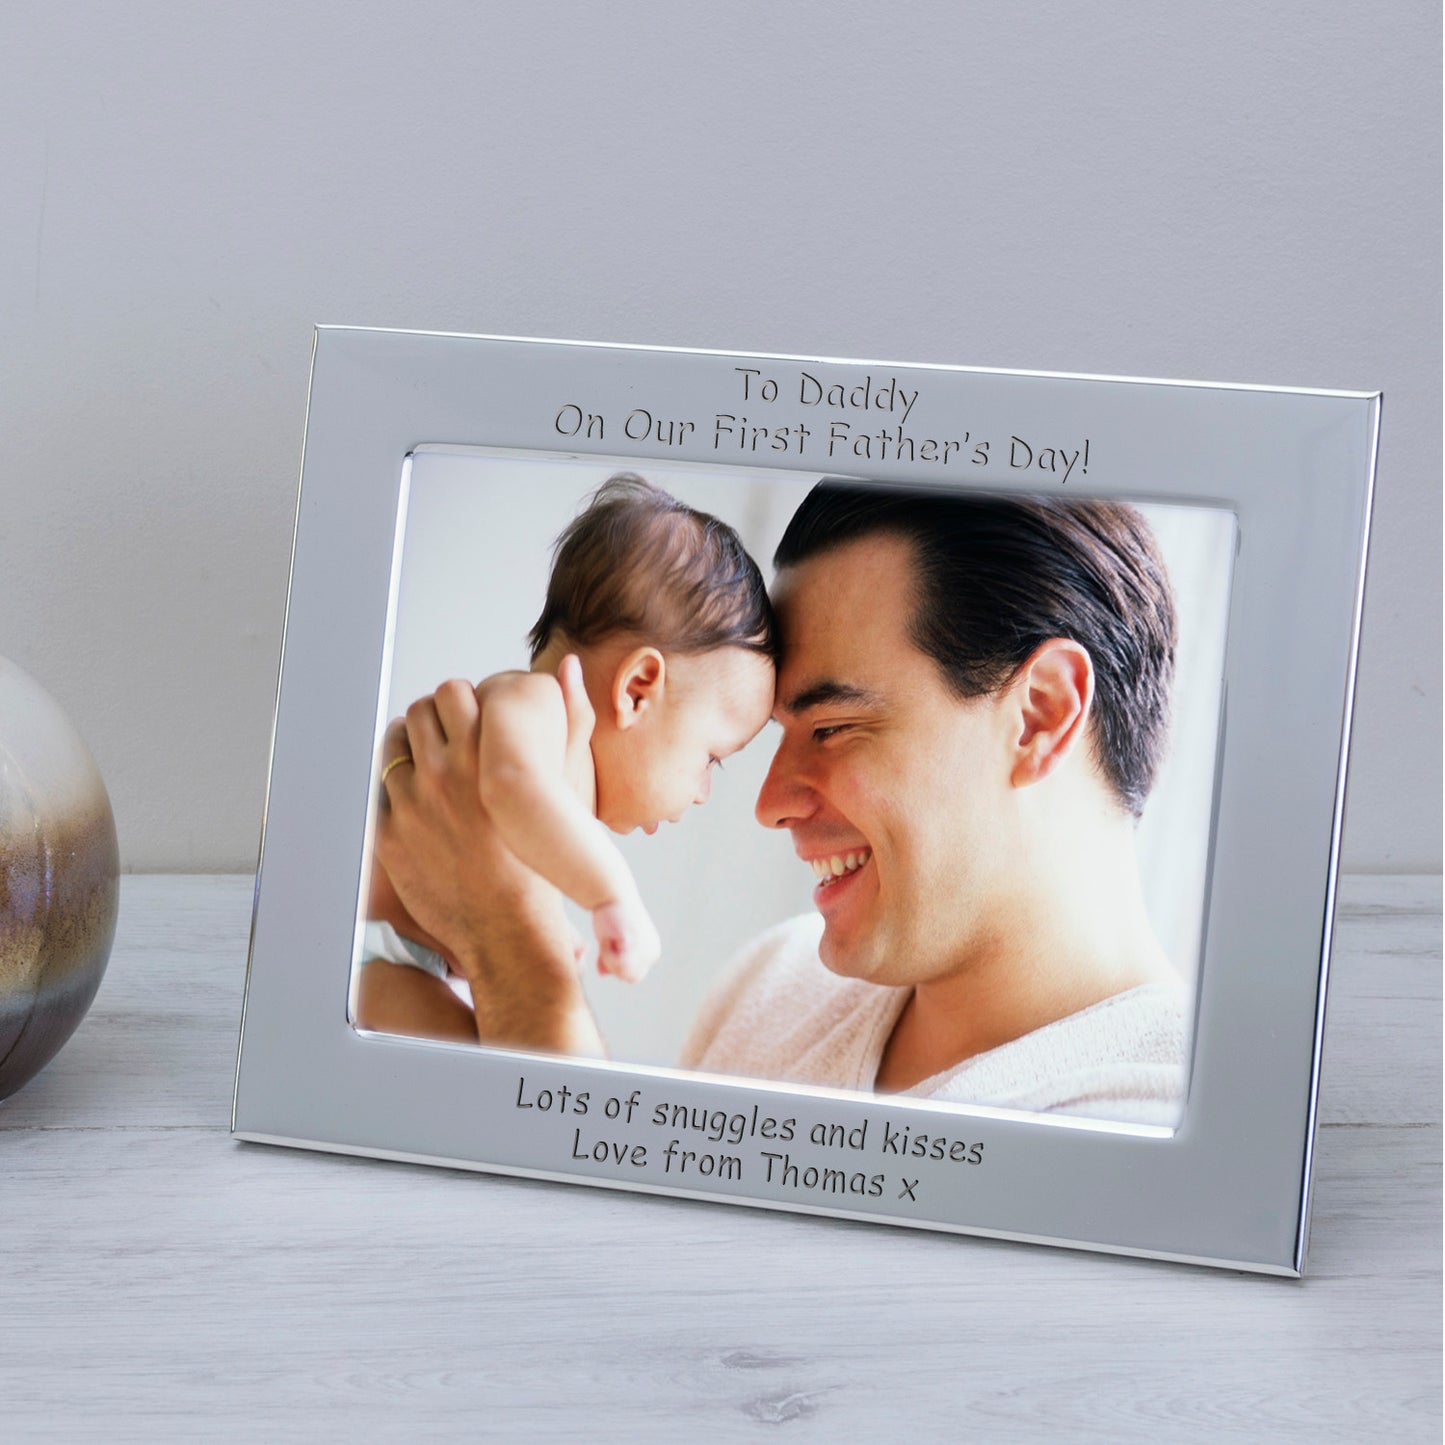 Engraved Silver Plated To Daddy On Our First Father’s Day Photo Frame